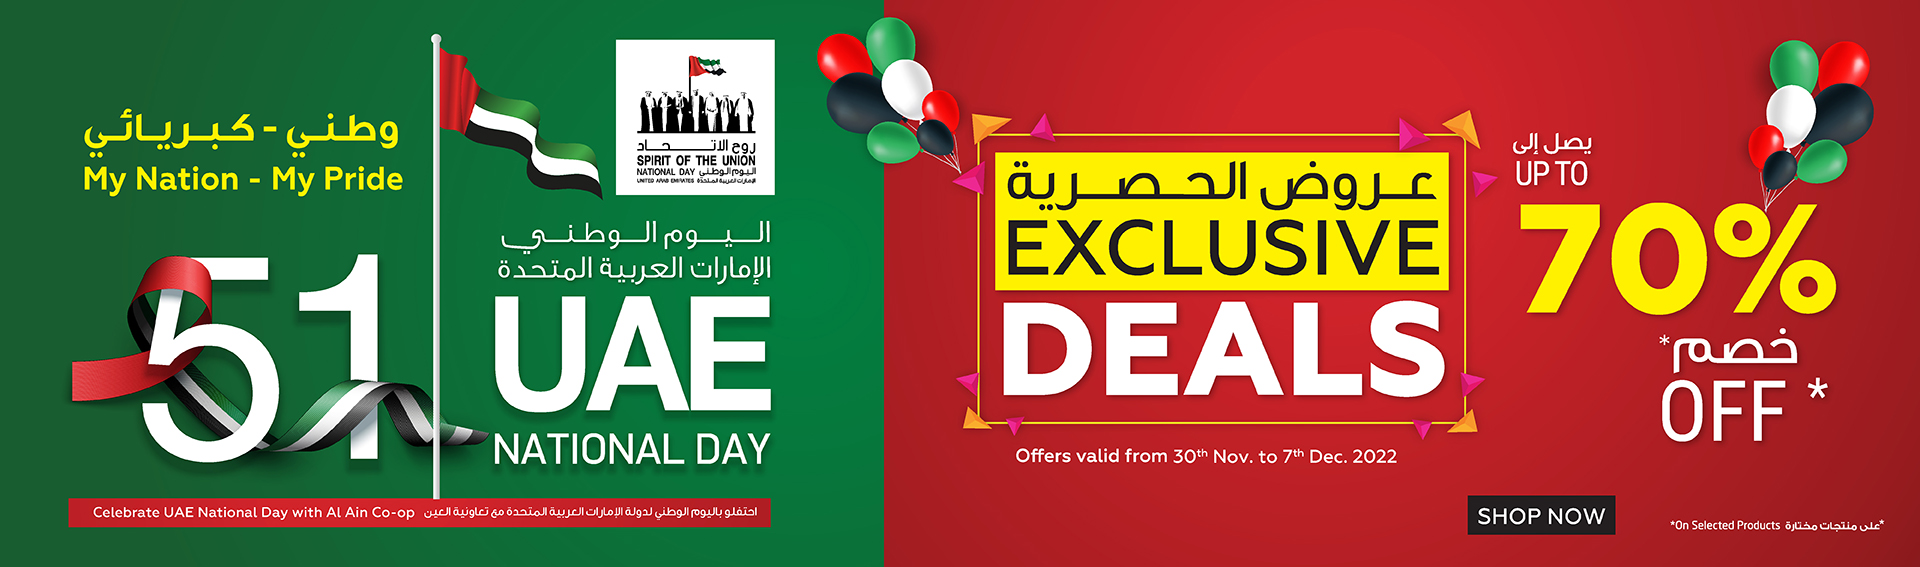 National Day Exclusive Deals 1920x567-01.jpg